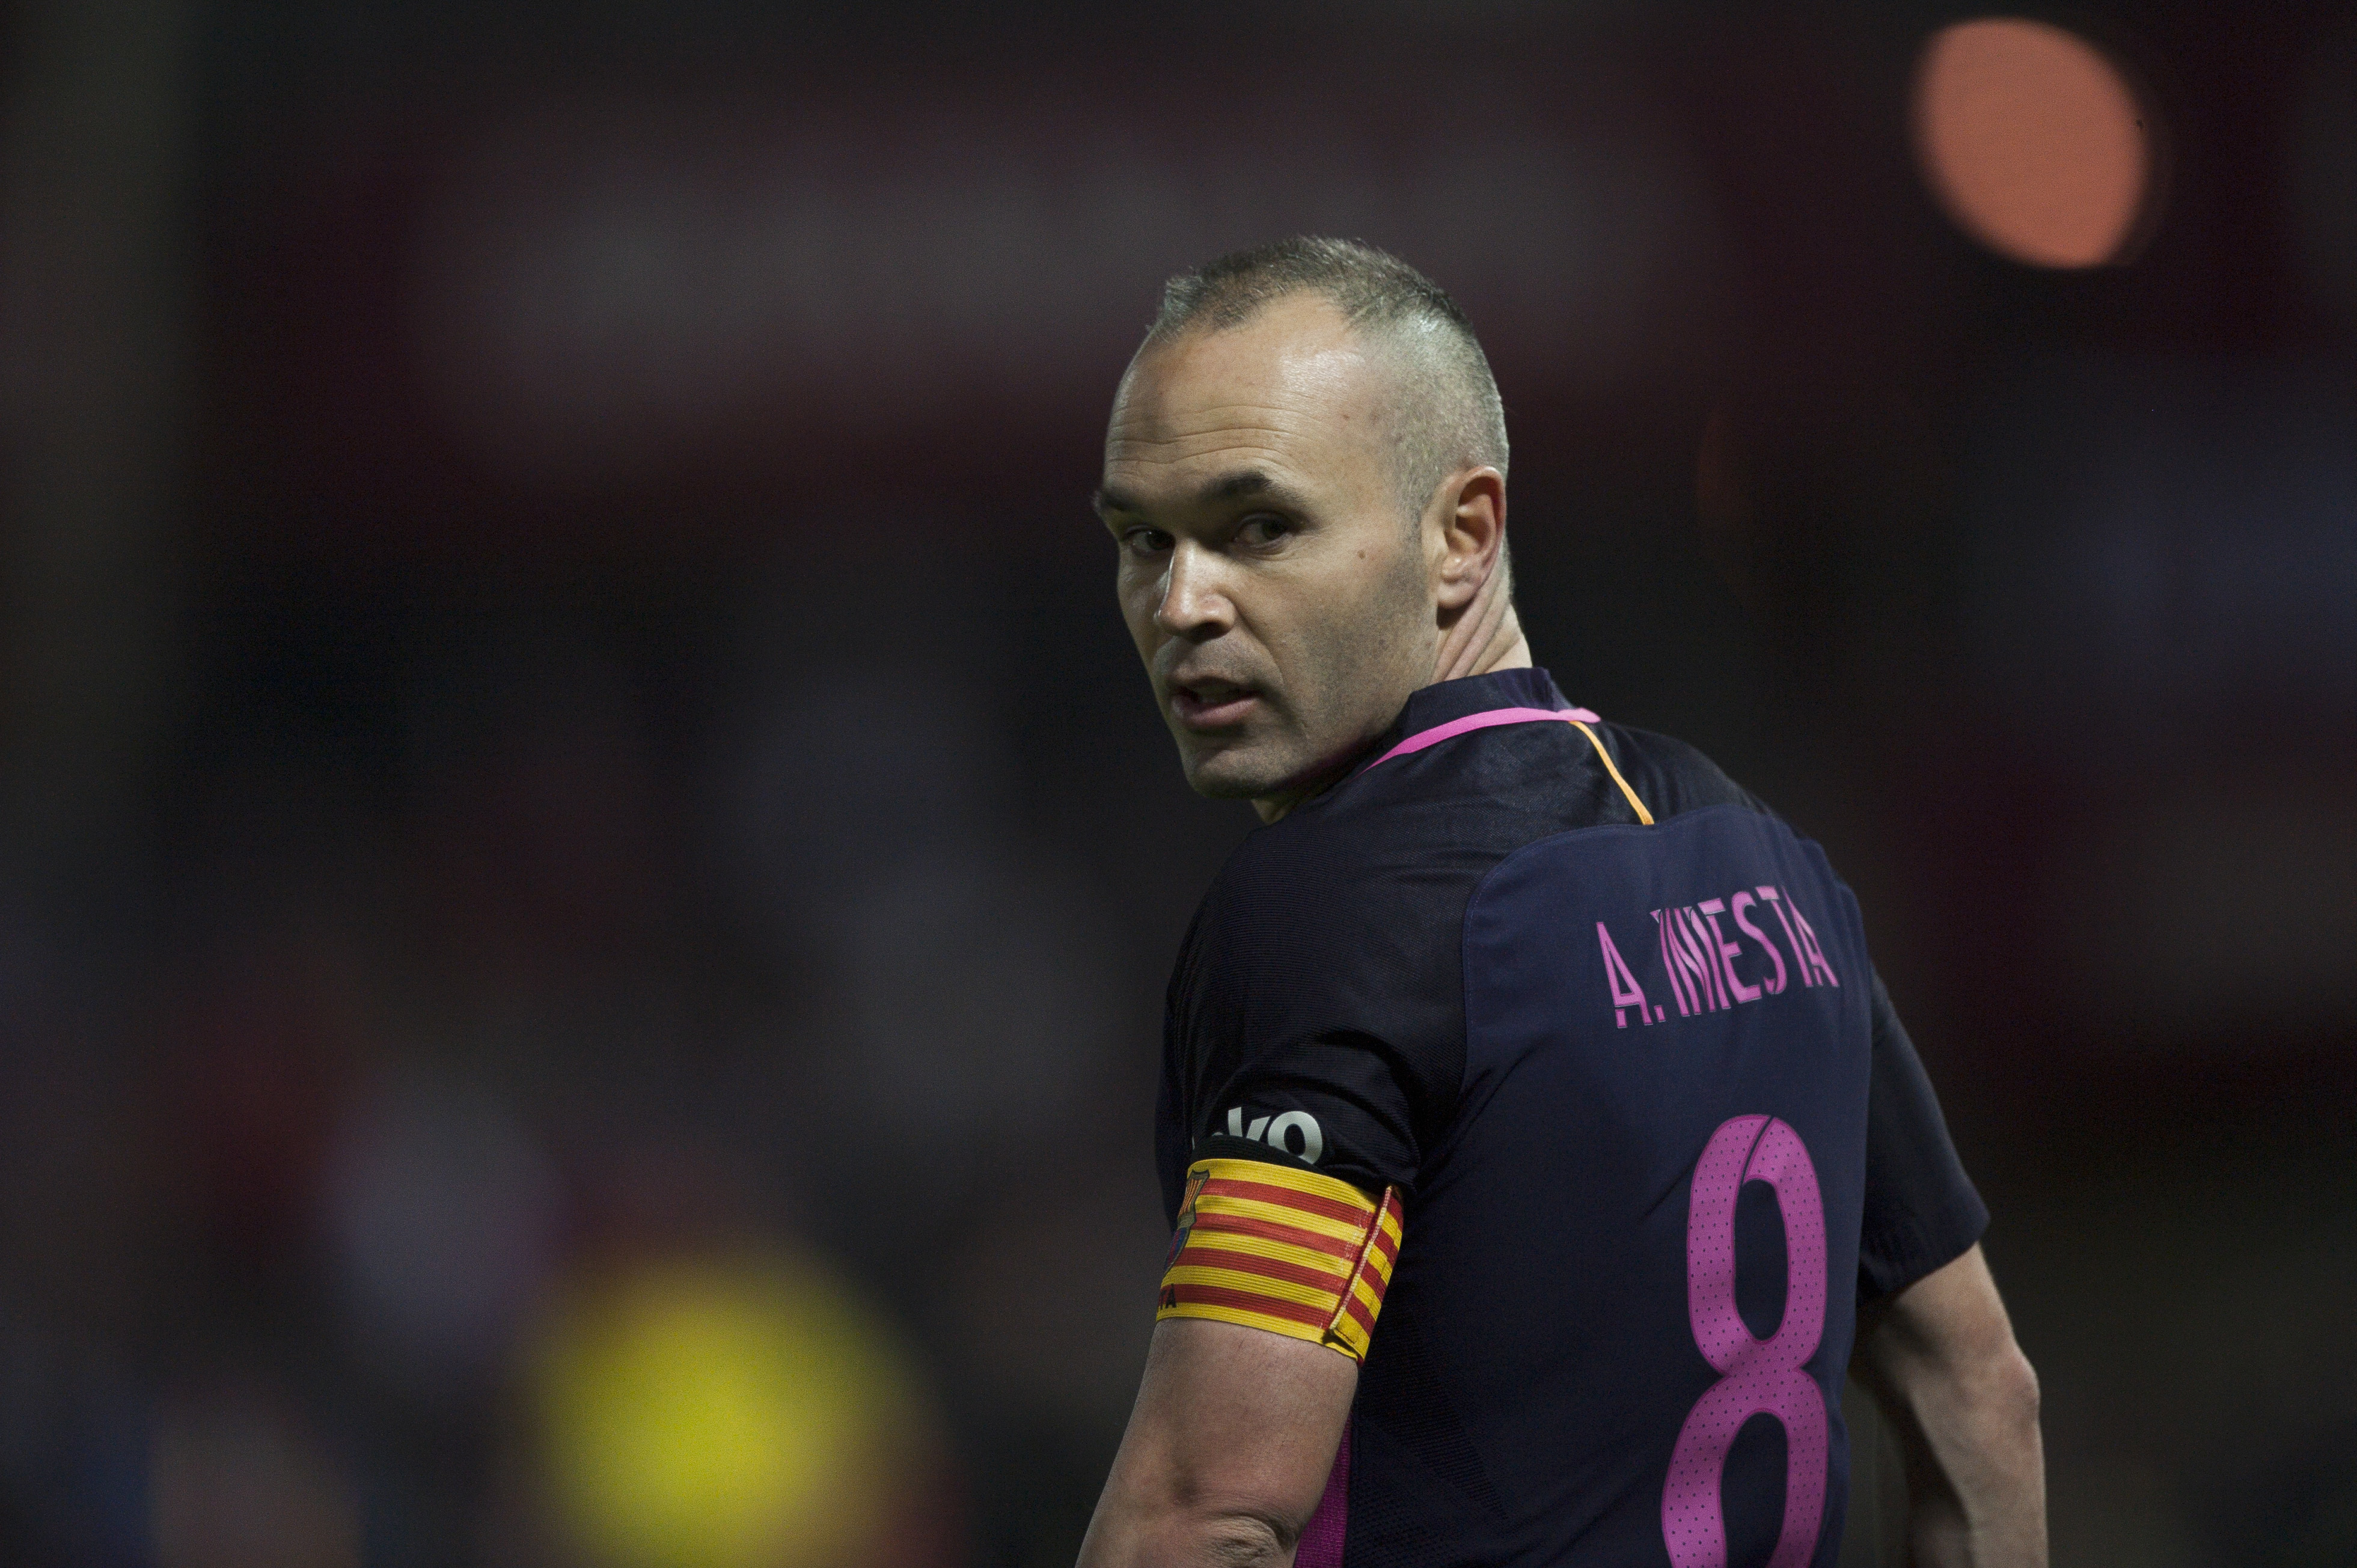 Andres Iniesta Pictures3921 x 2609